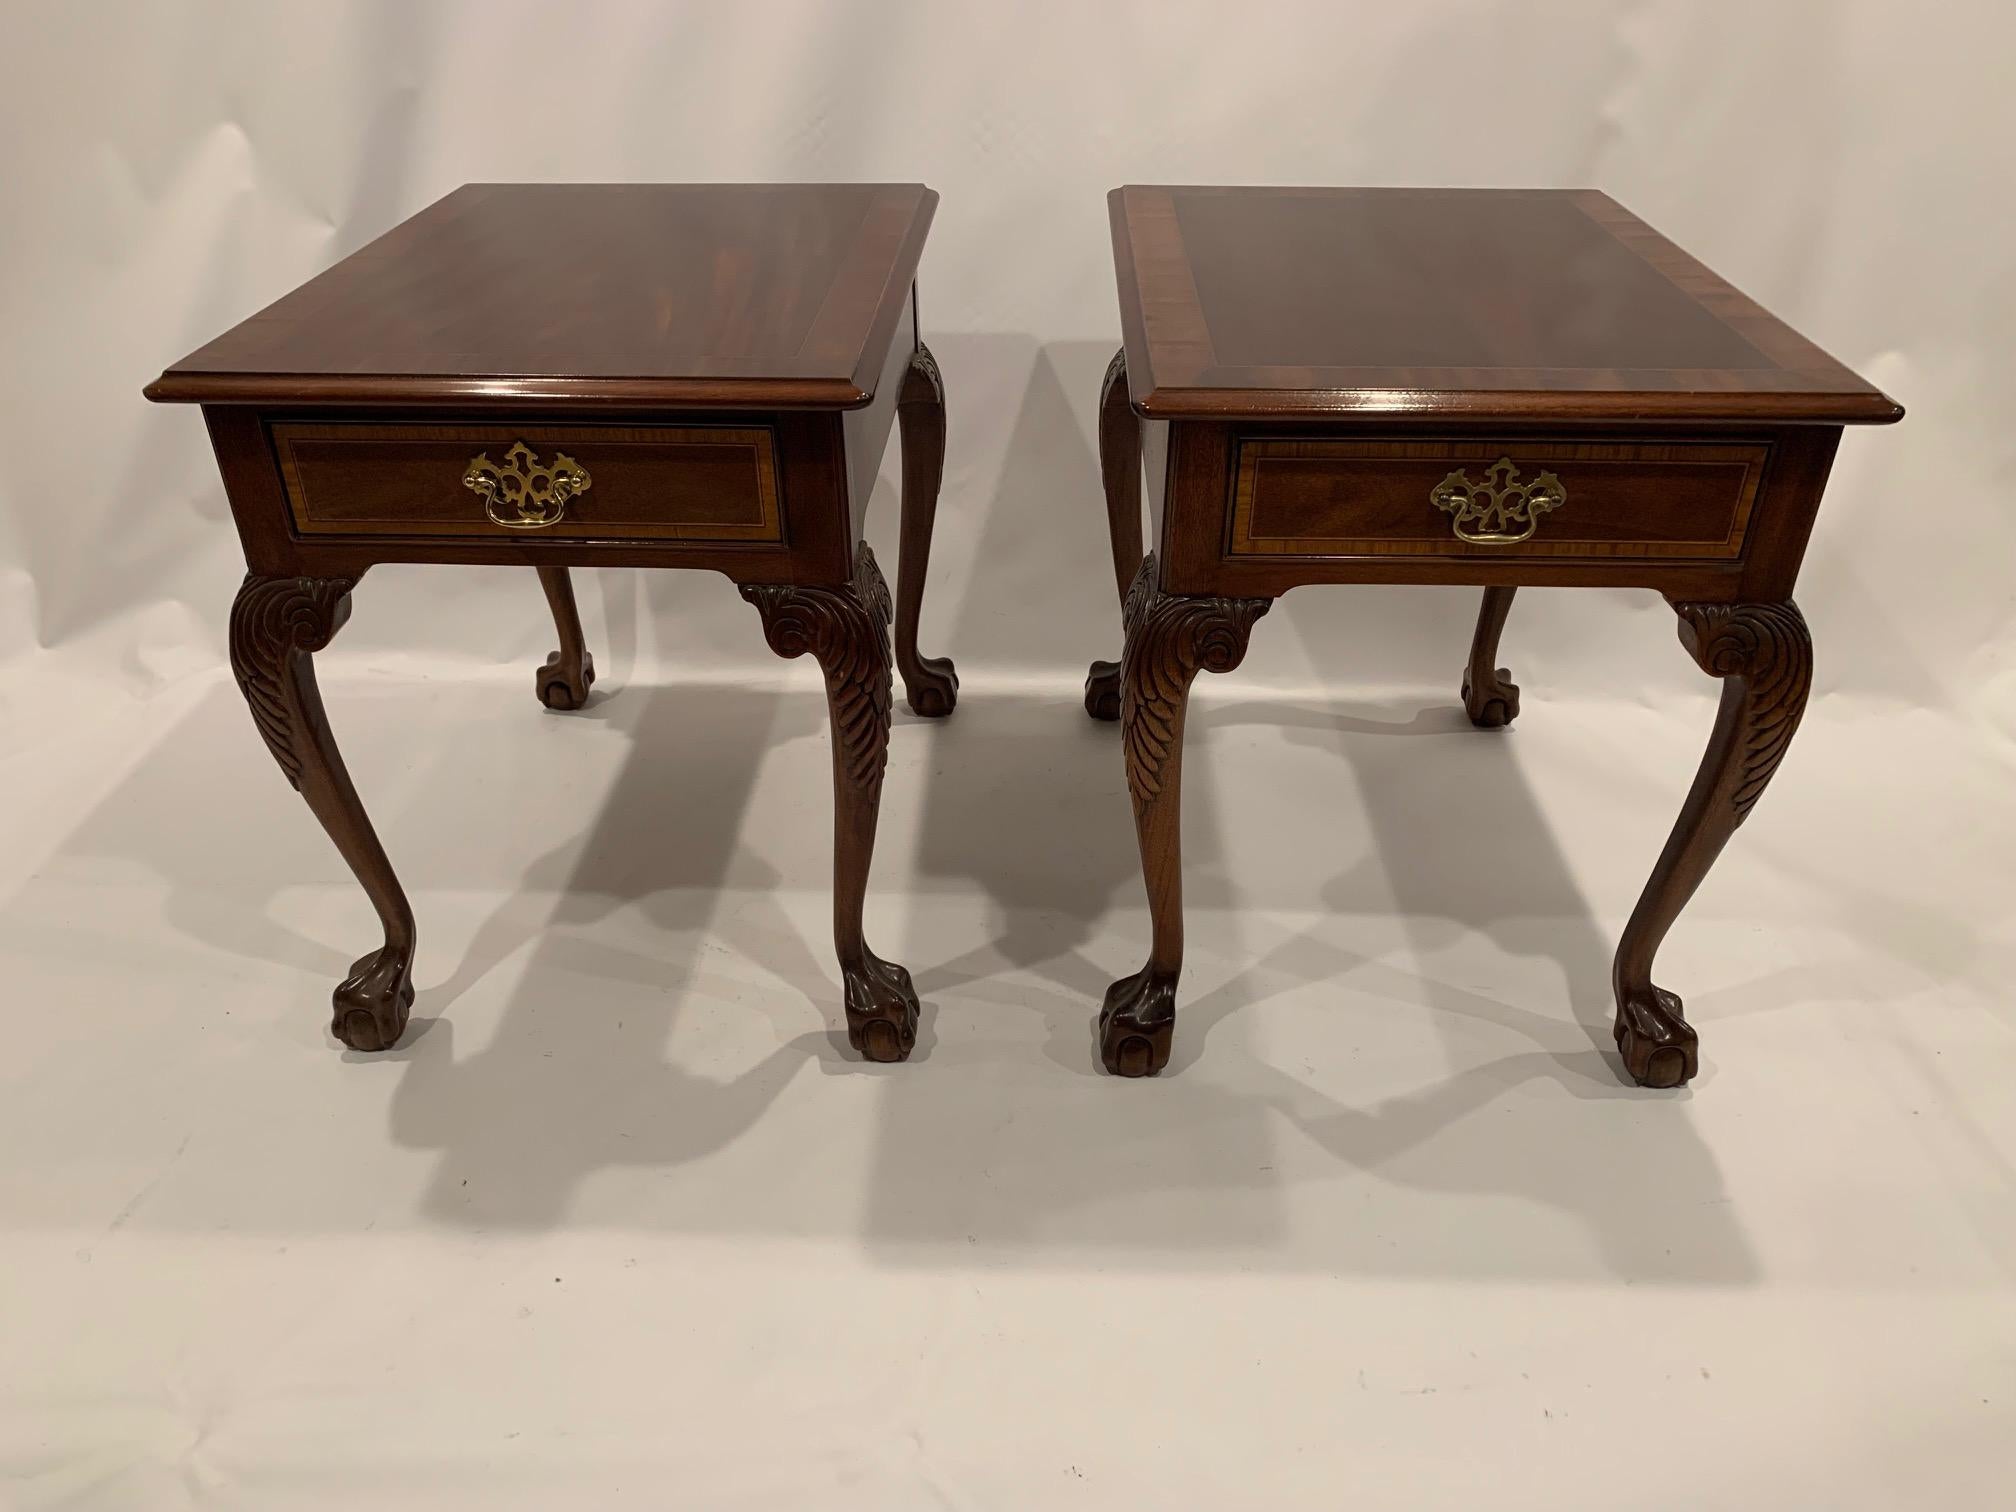 Handsome traditional Chippendale style rich mahogany end tables or night stands having ball and claw legs, single drawers, and brass hardware.